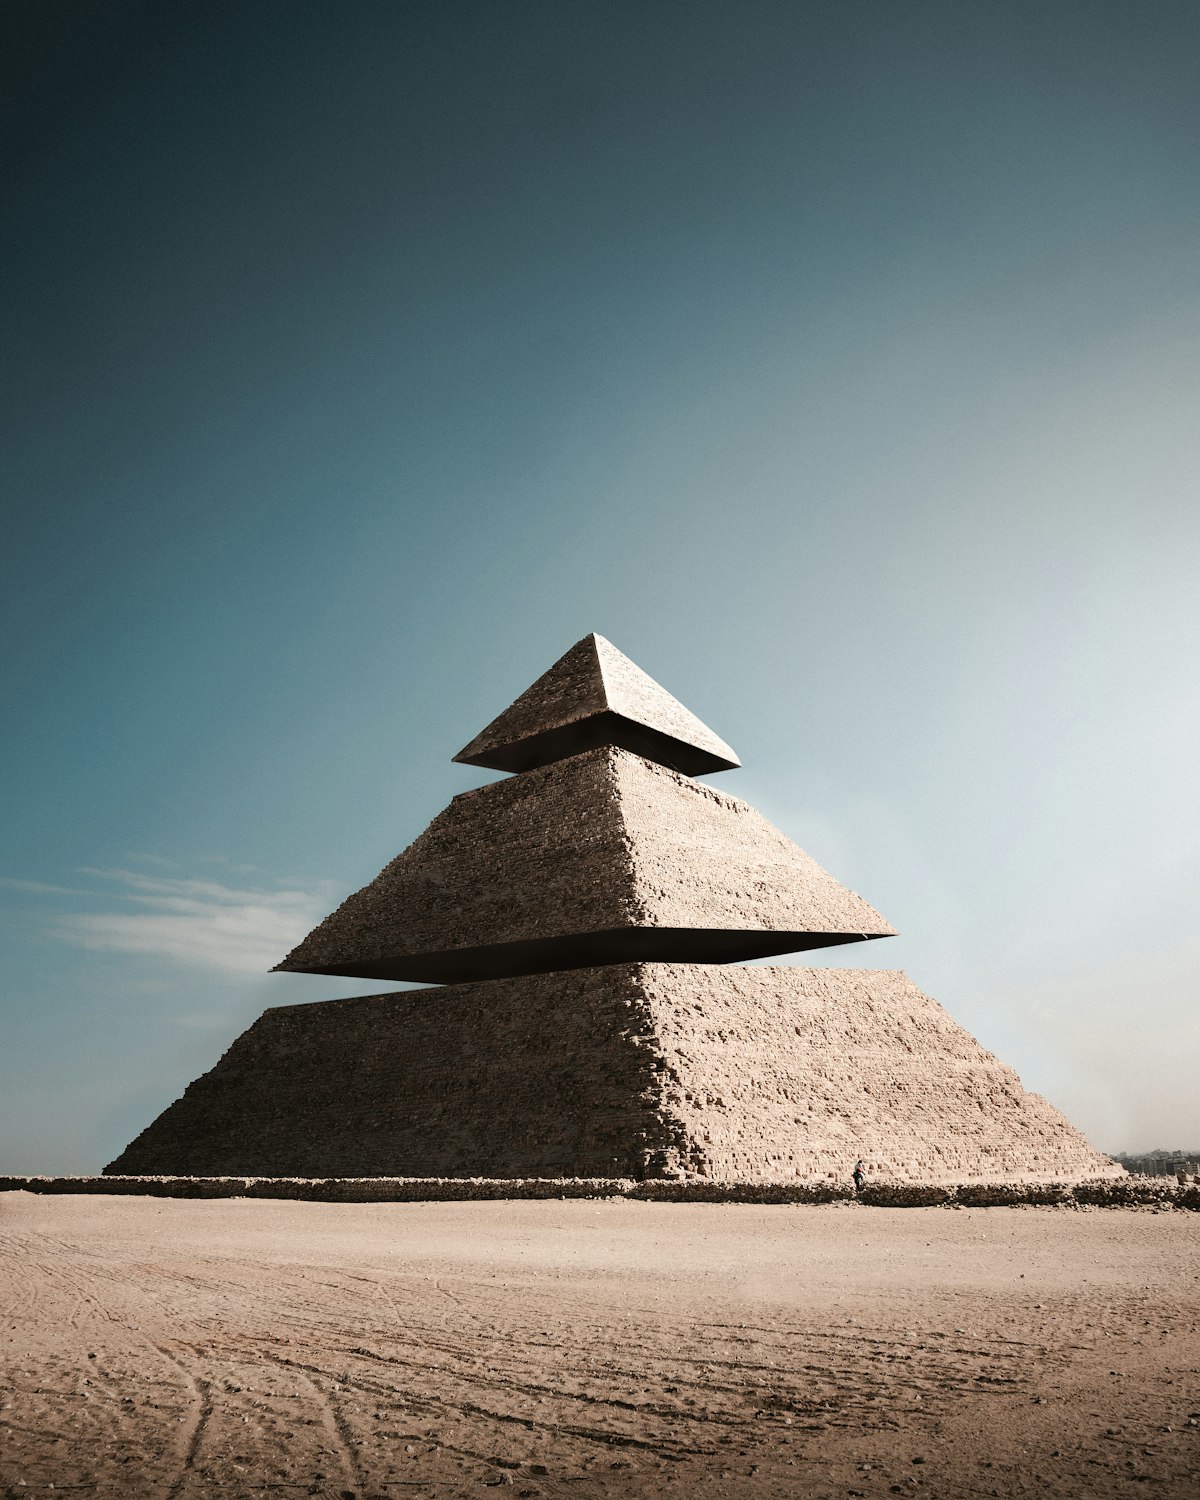 Applications of The Pyramid Principle in Systems Engineering